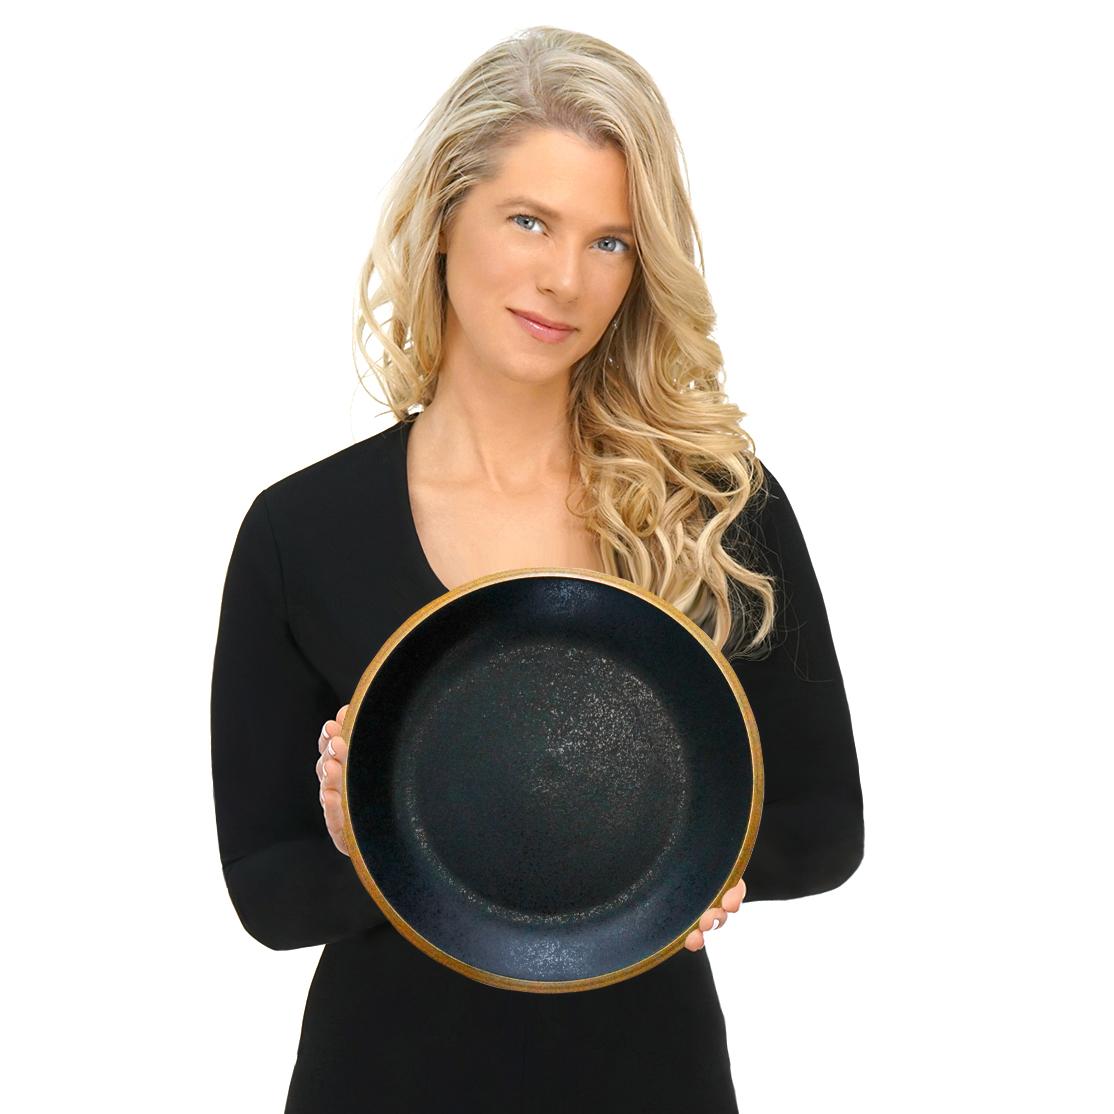 Circa 2000, by Dansk, American. This unique, extra complete set for 12 of Santiago Black is everyday dinnerware perfection. In addition to all the normal pieces, this set has twelve 12-inch serving platters as chargers and twelve 9-inch serving